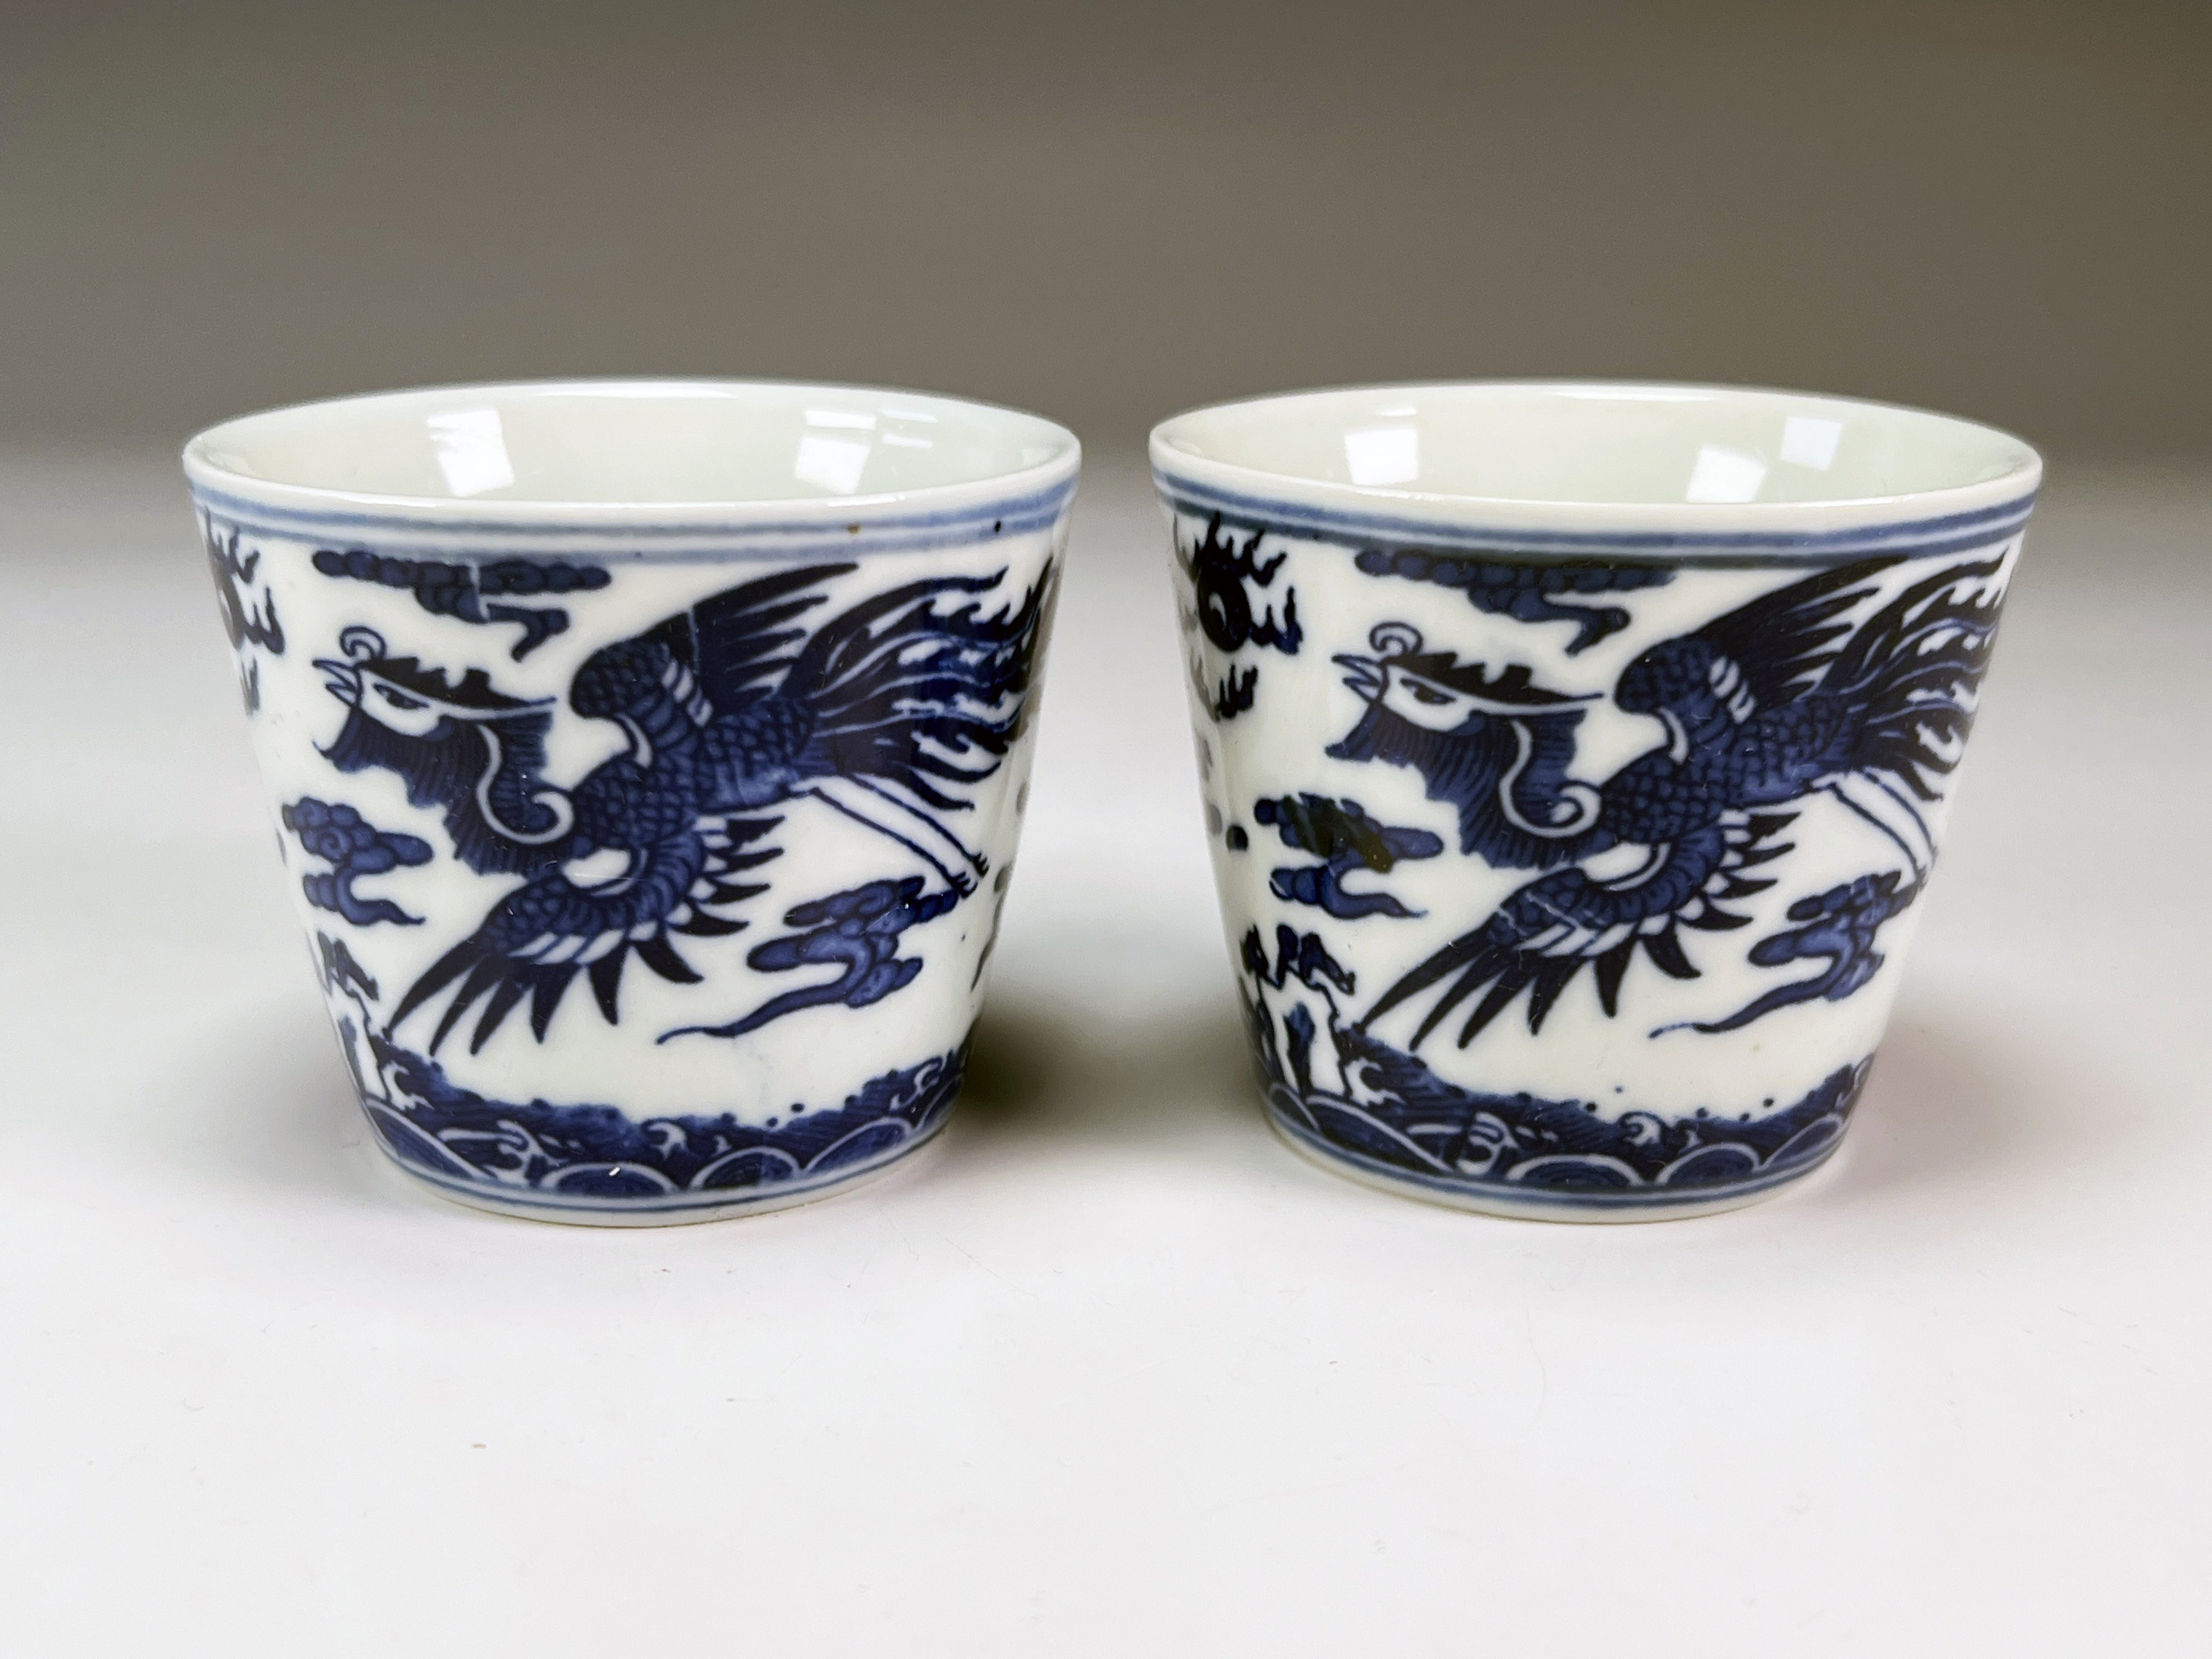 Charming Blue & White Phoenix Porcelain Tea Cups With Six Character Mark image 1